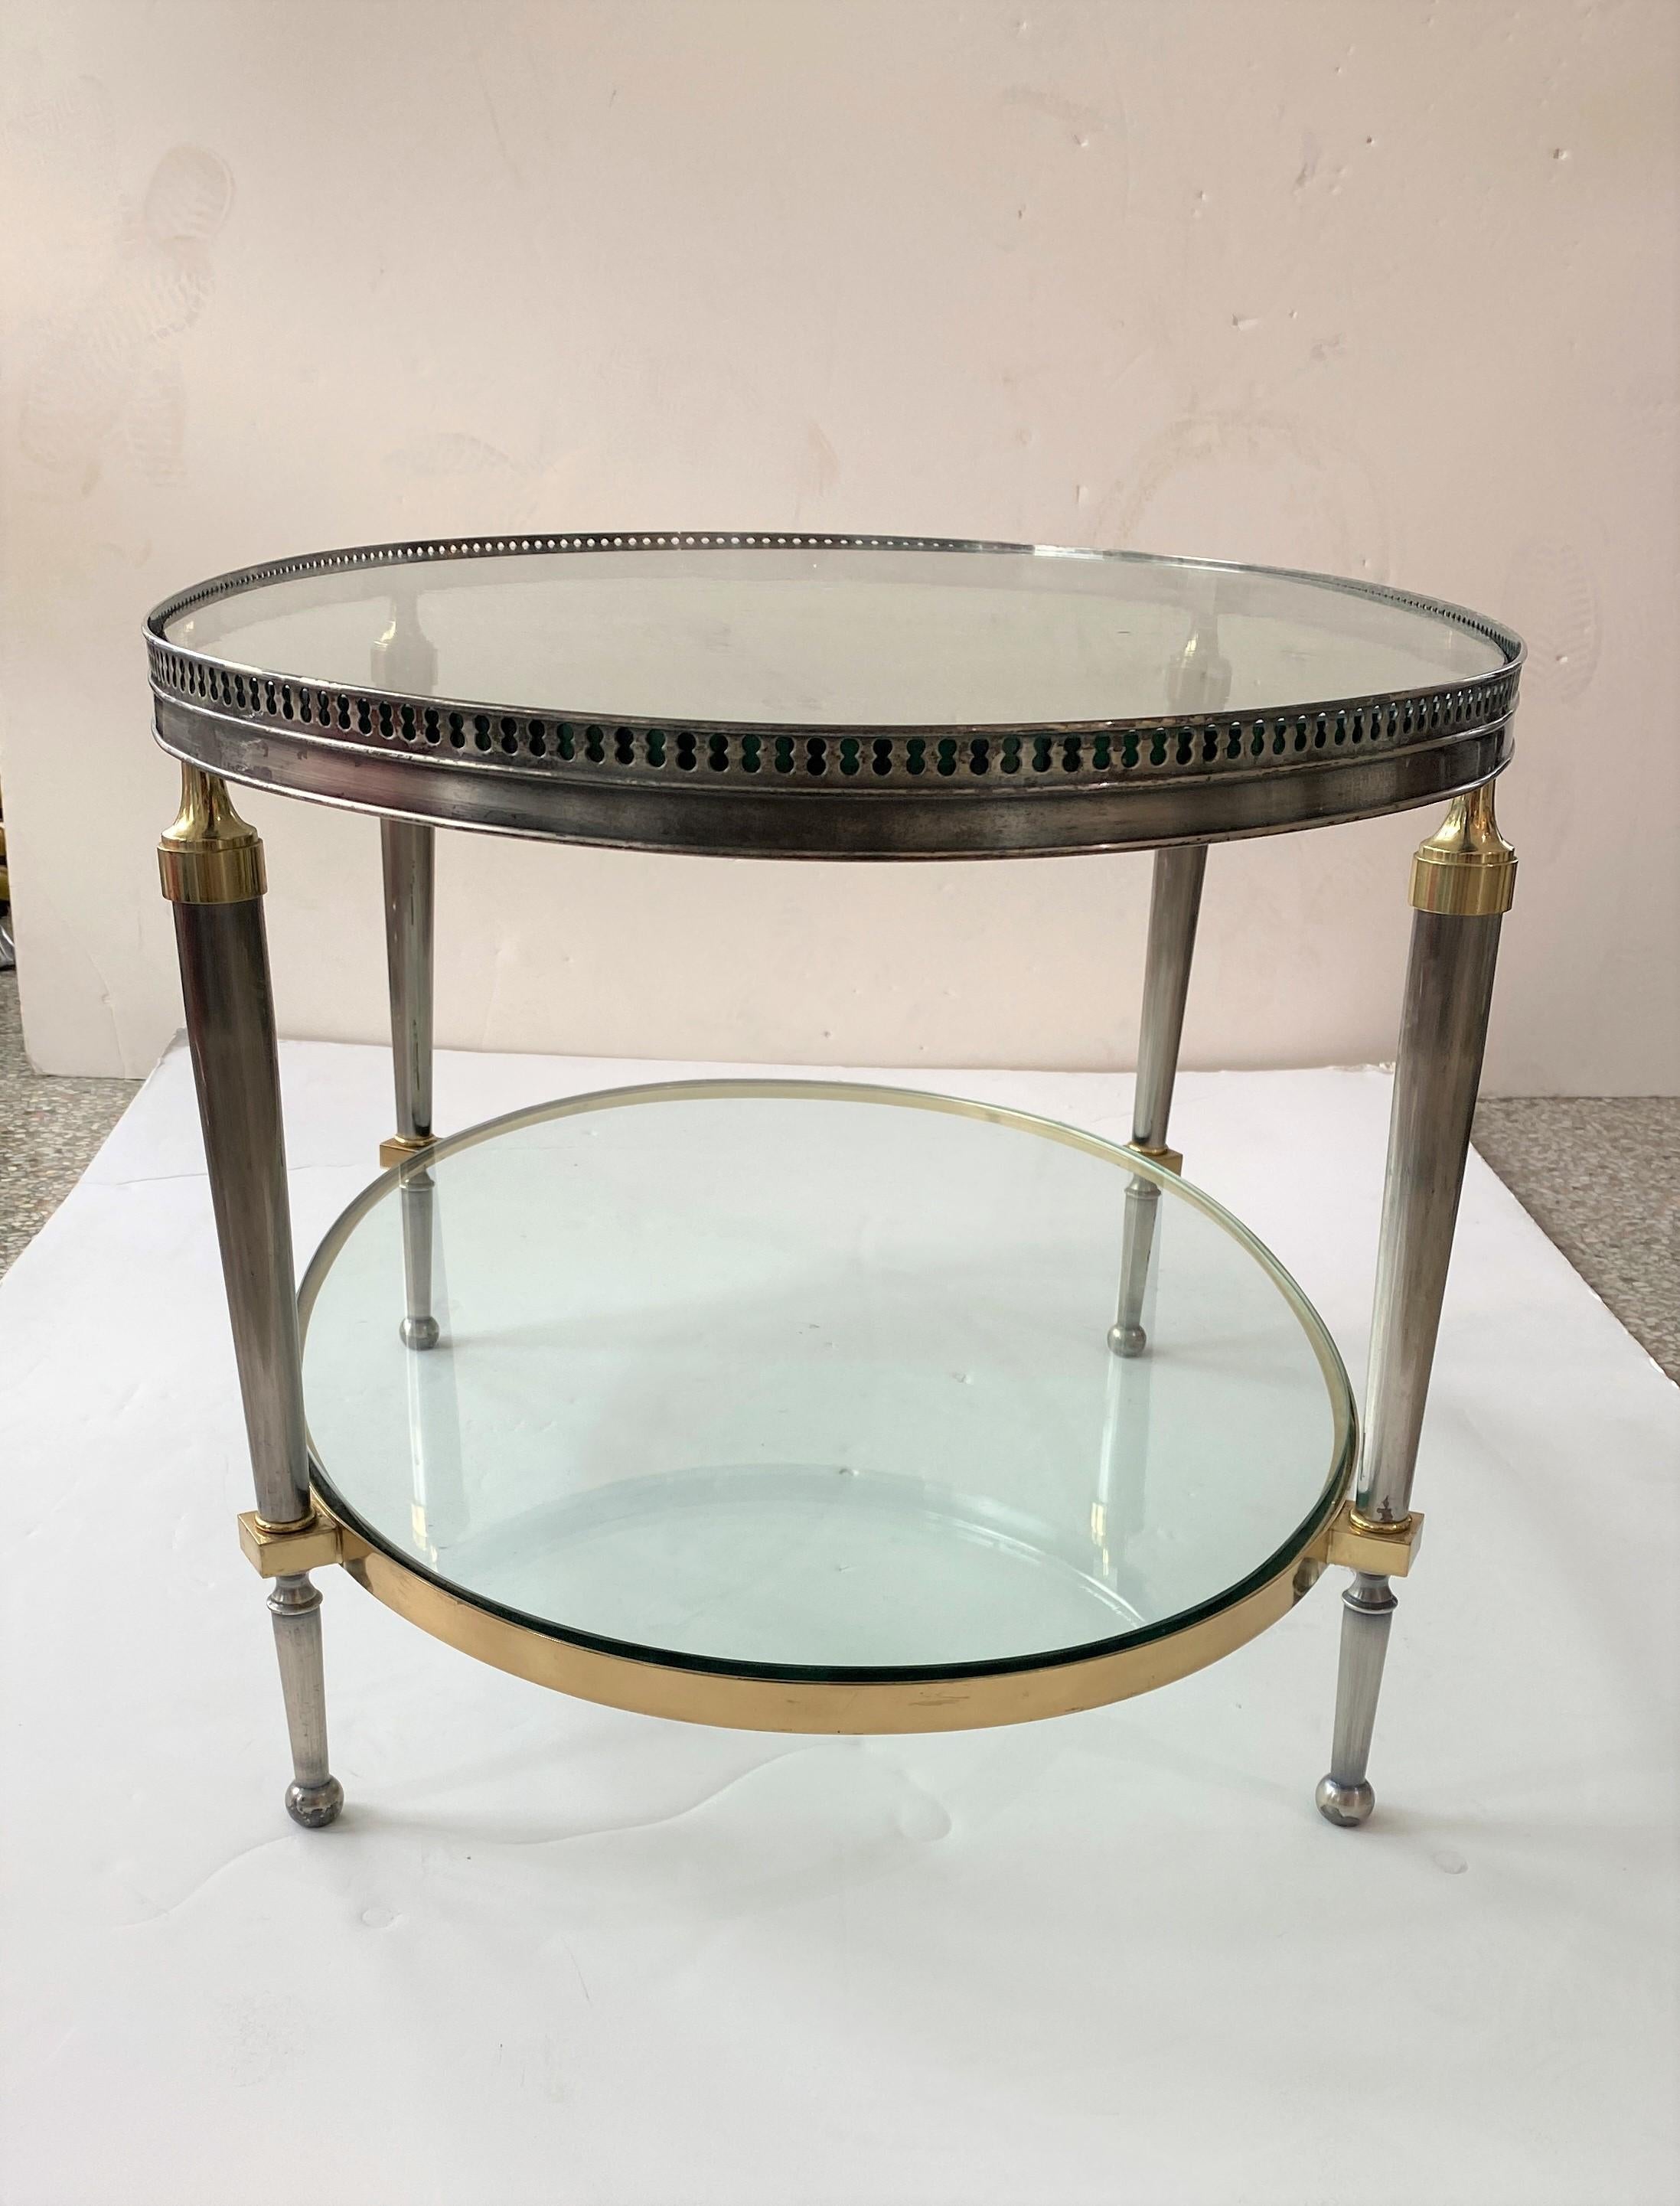 Campaign Trouvailles Steel and Brass Oval Cocktail Table